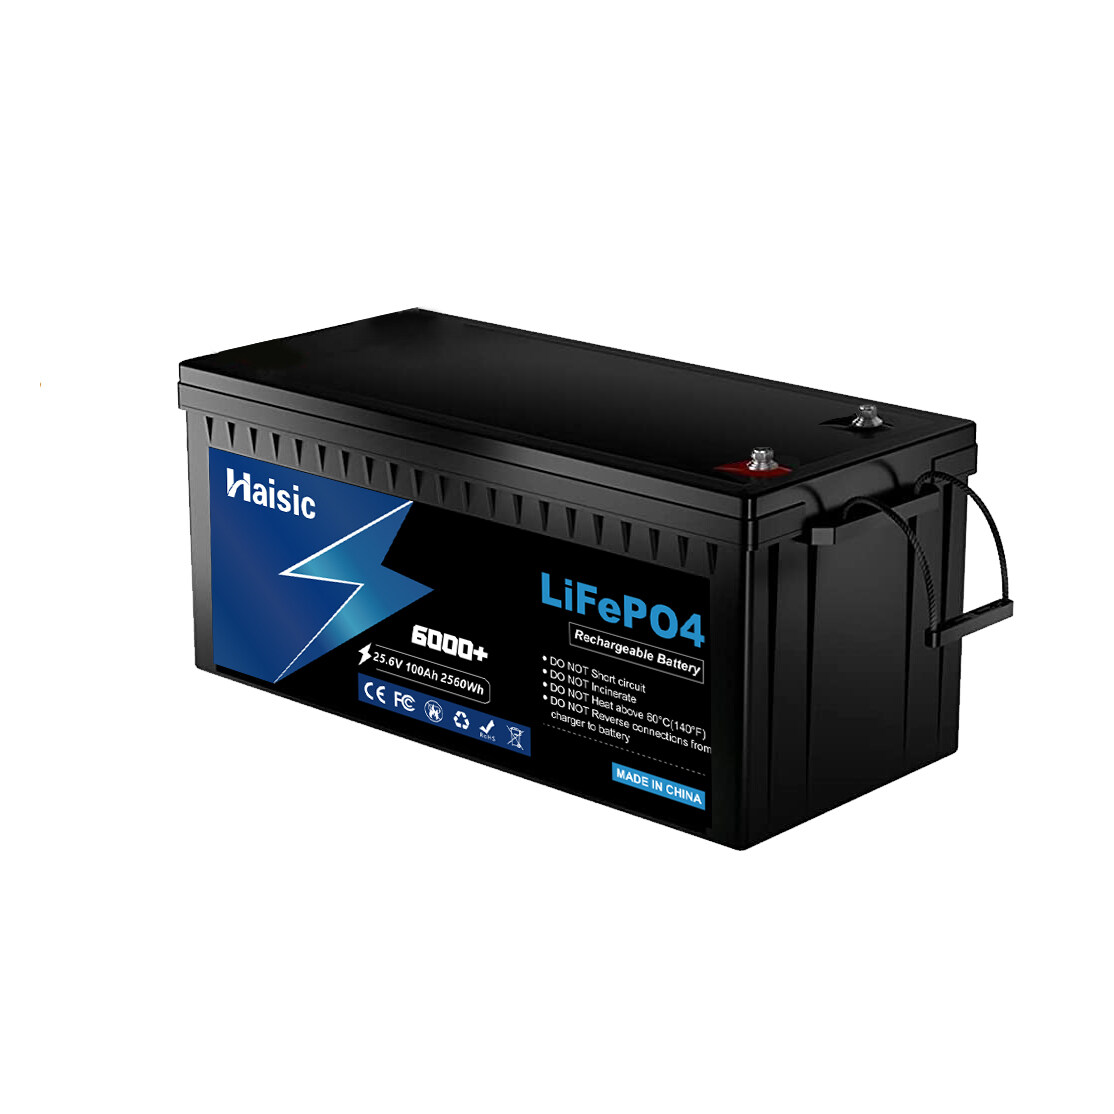 China’s Leading 100Ah LiFePO4 Battery Pack Supplier: Unleashing the Power of Energy Storage